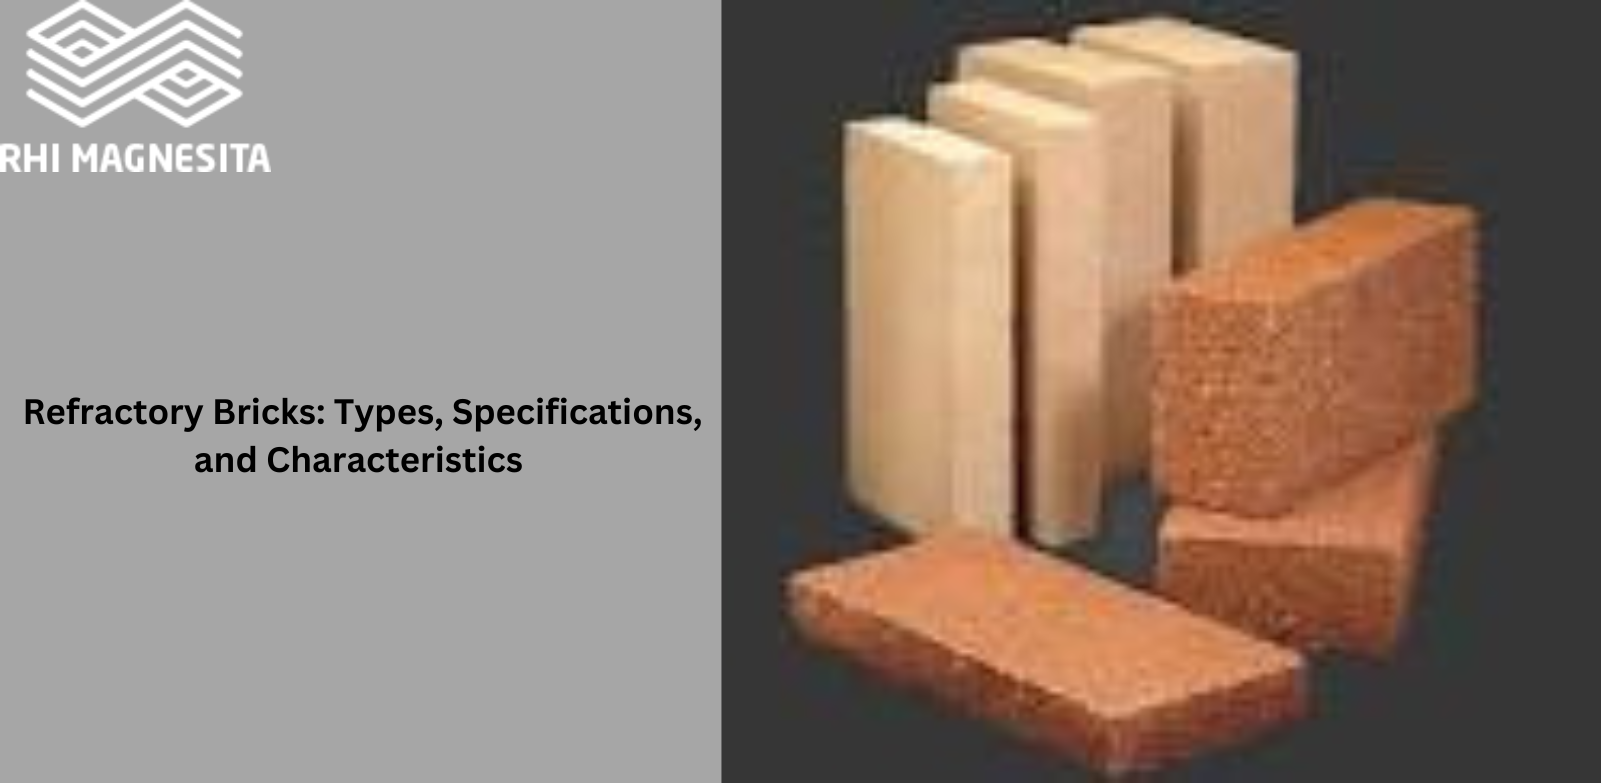 Refractory Bricks: Types, Specifications, and Characteristics